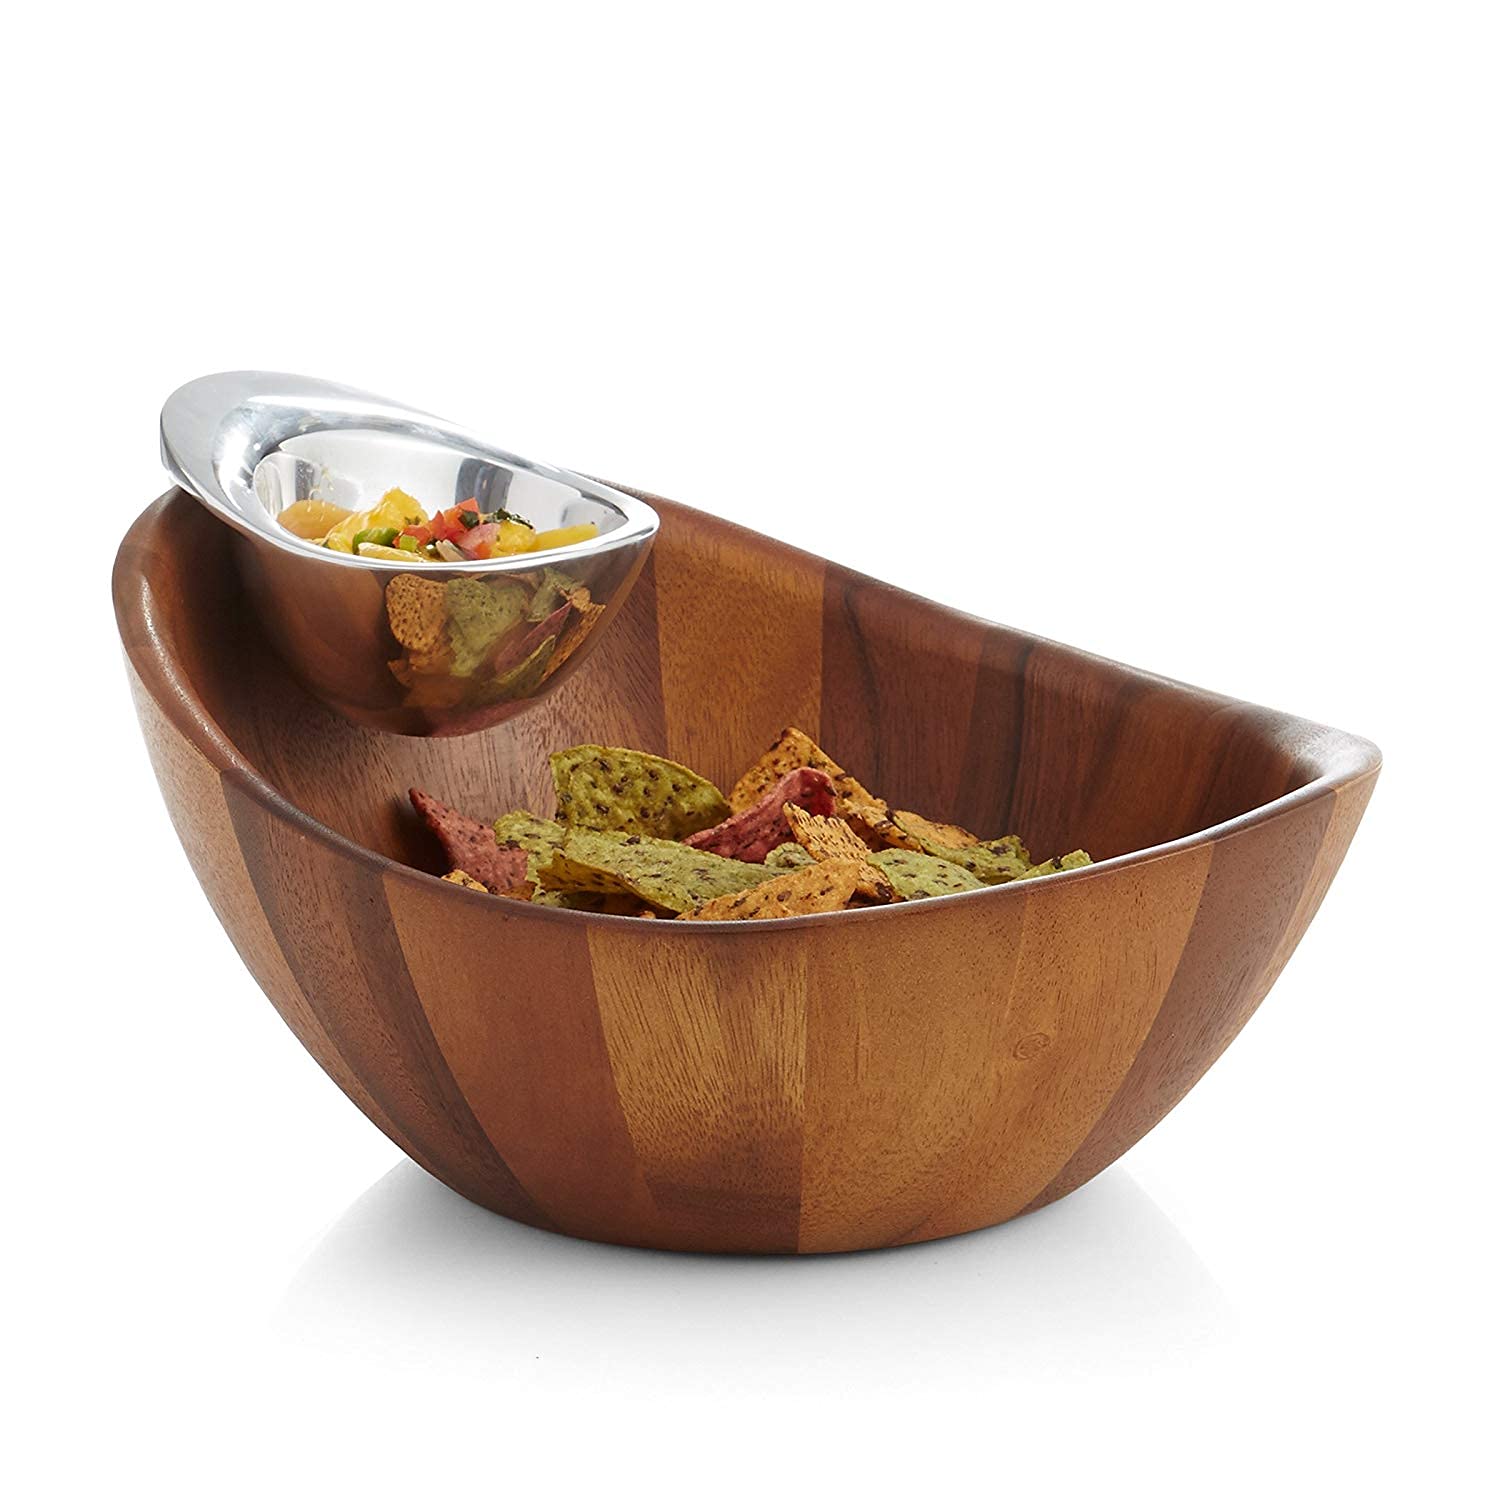 Nambe - Serveware Collection - Harmony Chip and Dip Bowl - Measures at 12" x 6.5" - Made with Acacia Wood and Nambe Alloy - Designed by Wei Young